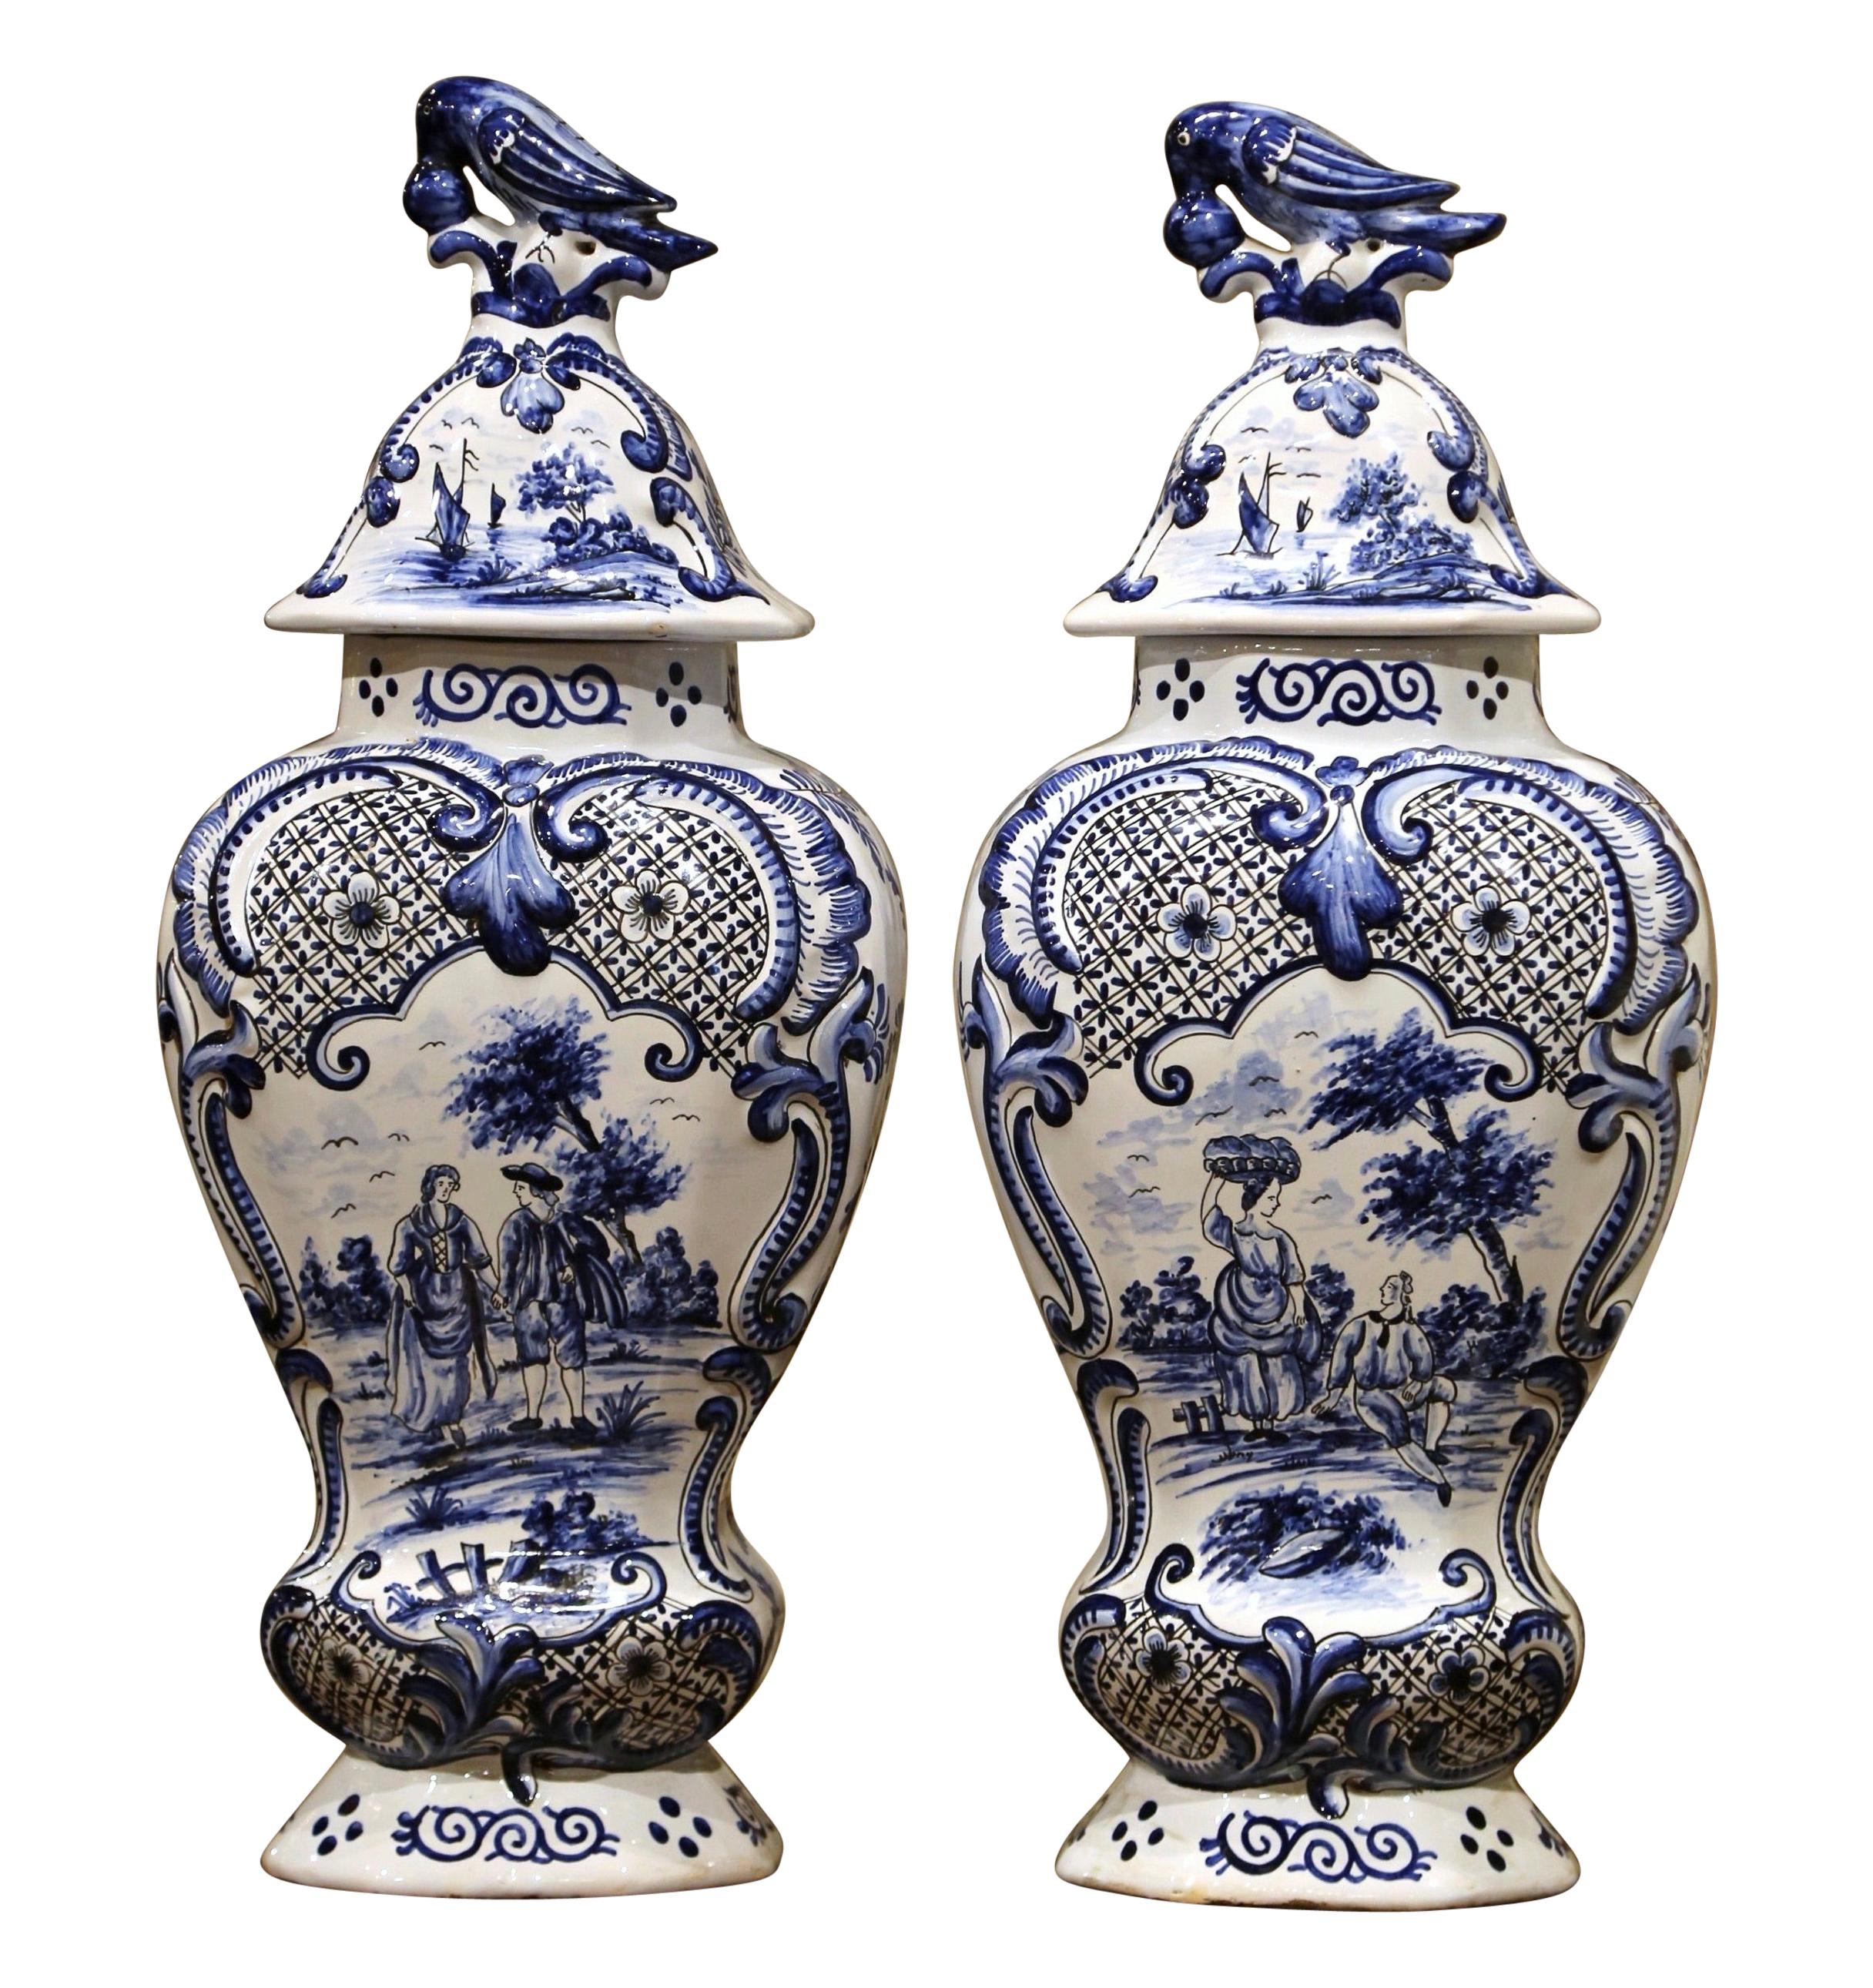 Pair of Mid-19th Century French Blue and White Faience Delft Vases with Lids